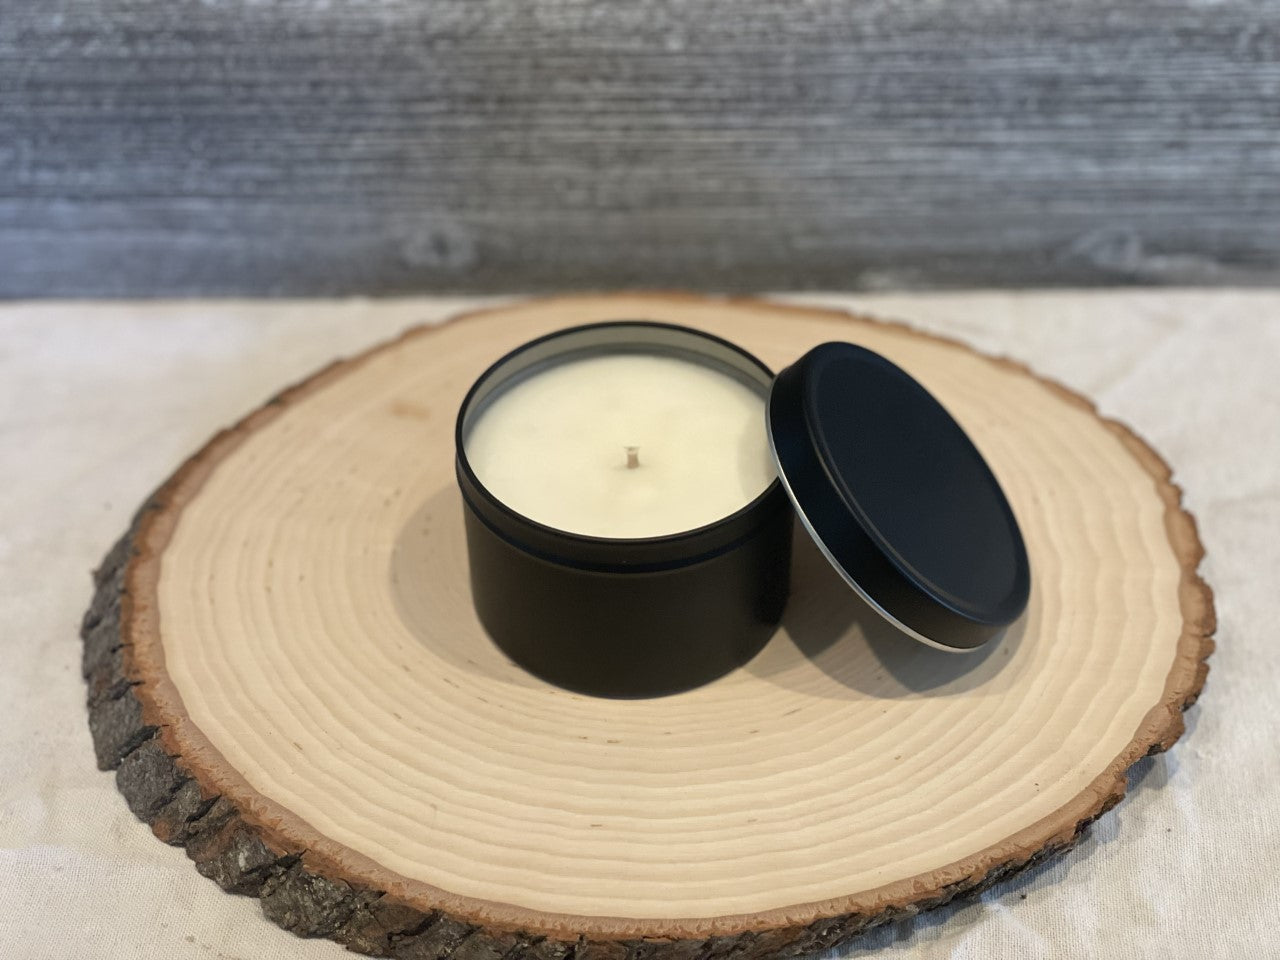 Mango & Tangerine Scented | Pure Soy Candle